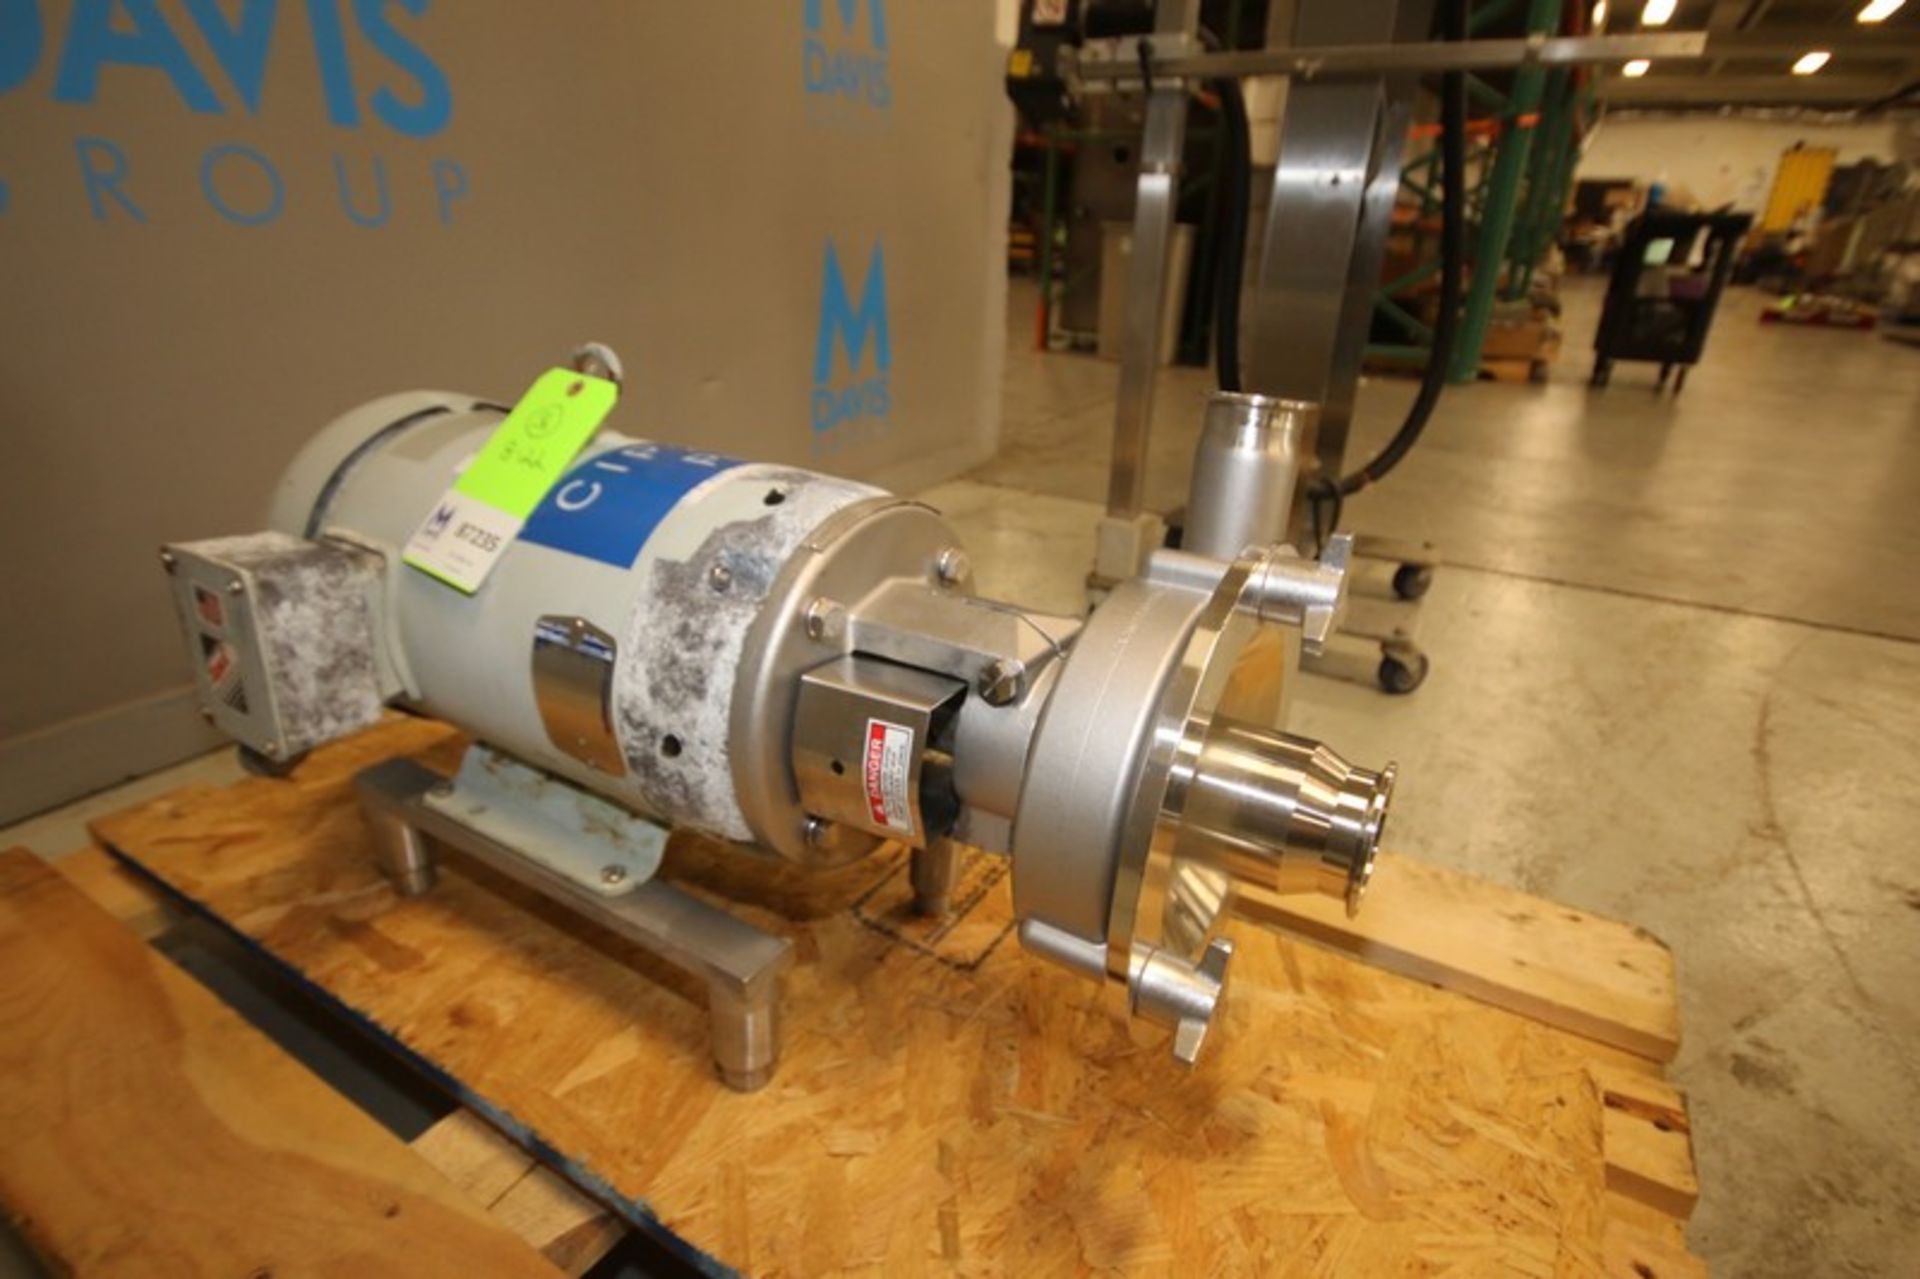 Fristam 15 hp S/S Centrifugal Pump, Model FPX3532-155, SN 1400115, with 2.5" x 2" Clamp Type, S/S - Image 2 of 4